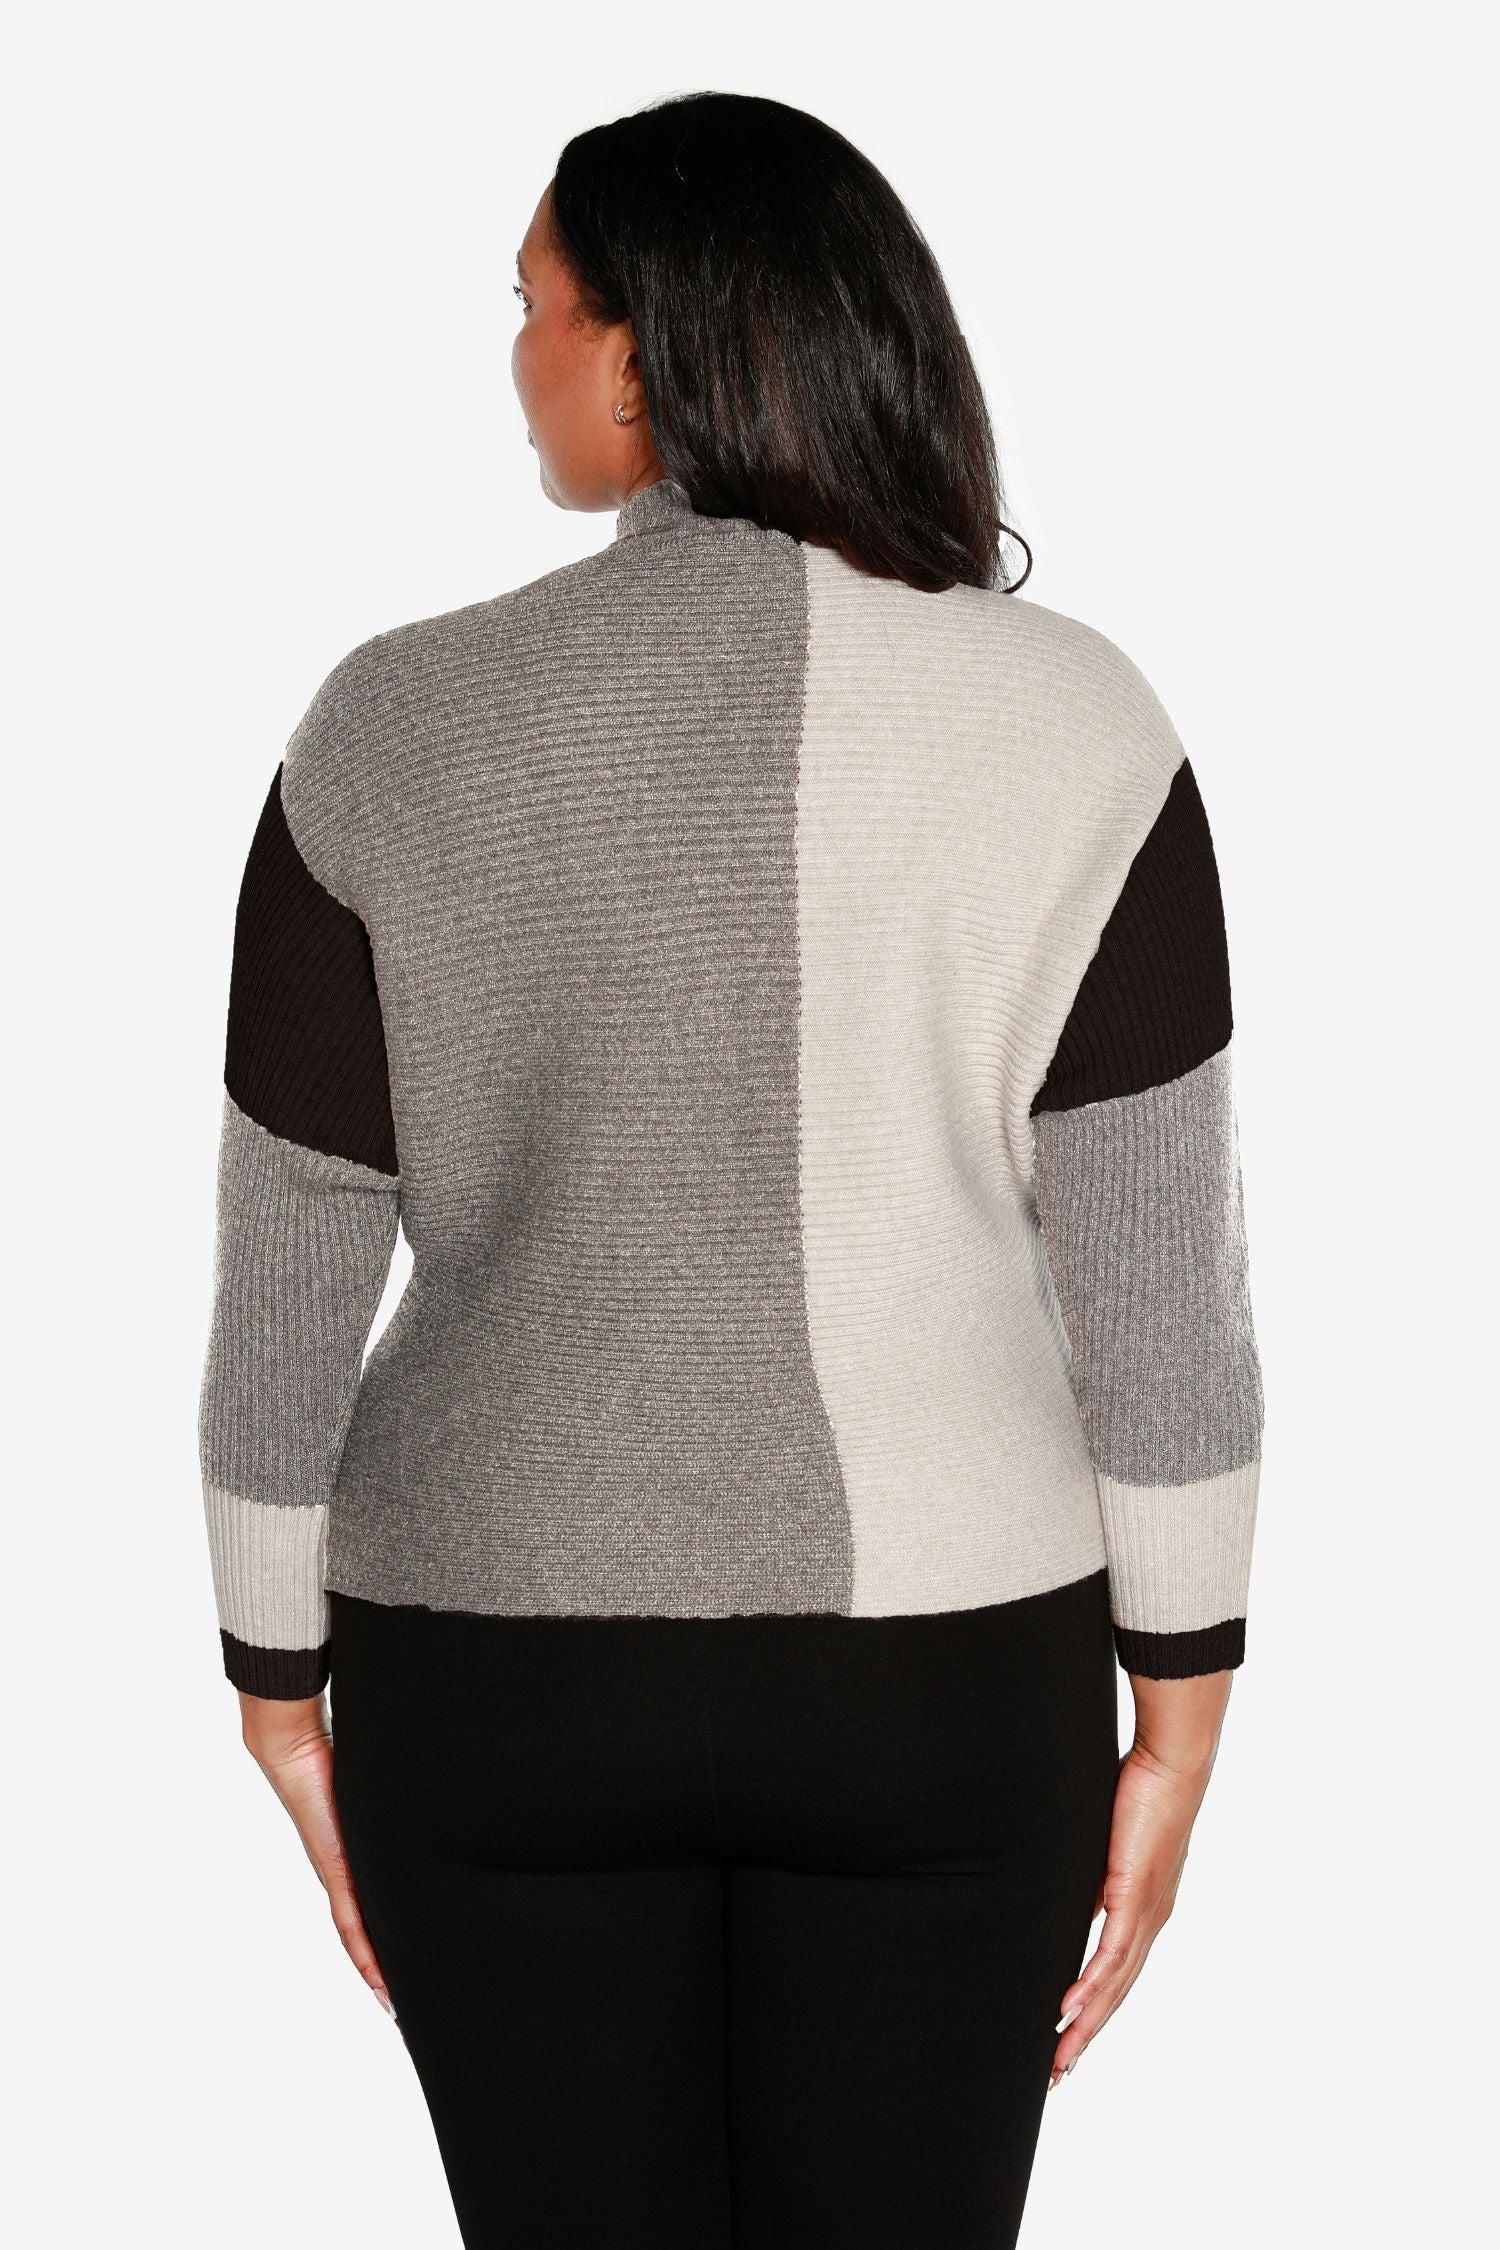 Women's Color Block Pullover Sweater with a Mock Neck | Curvy